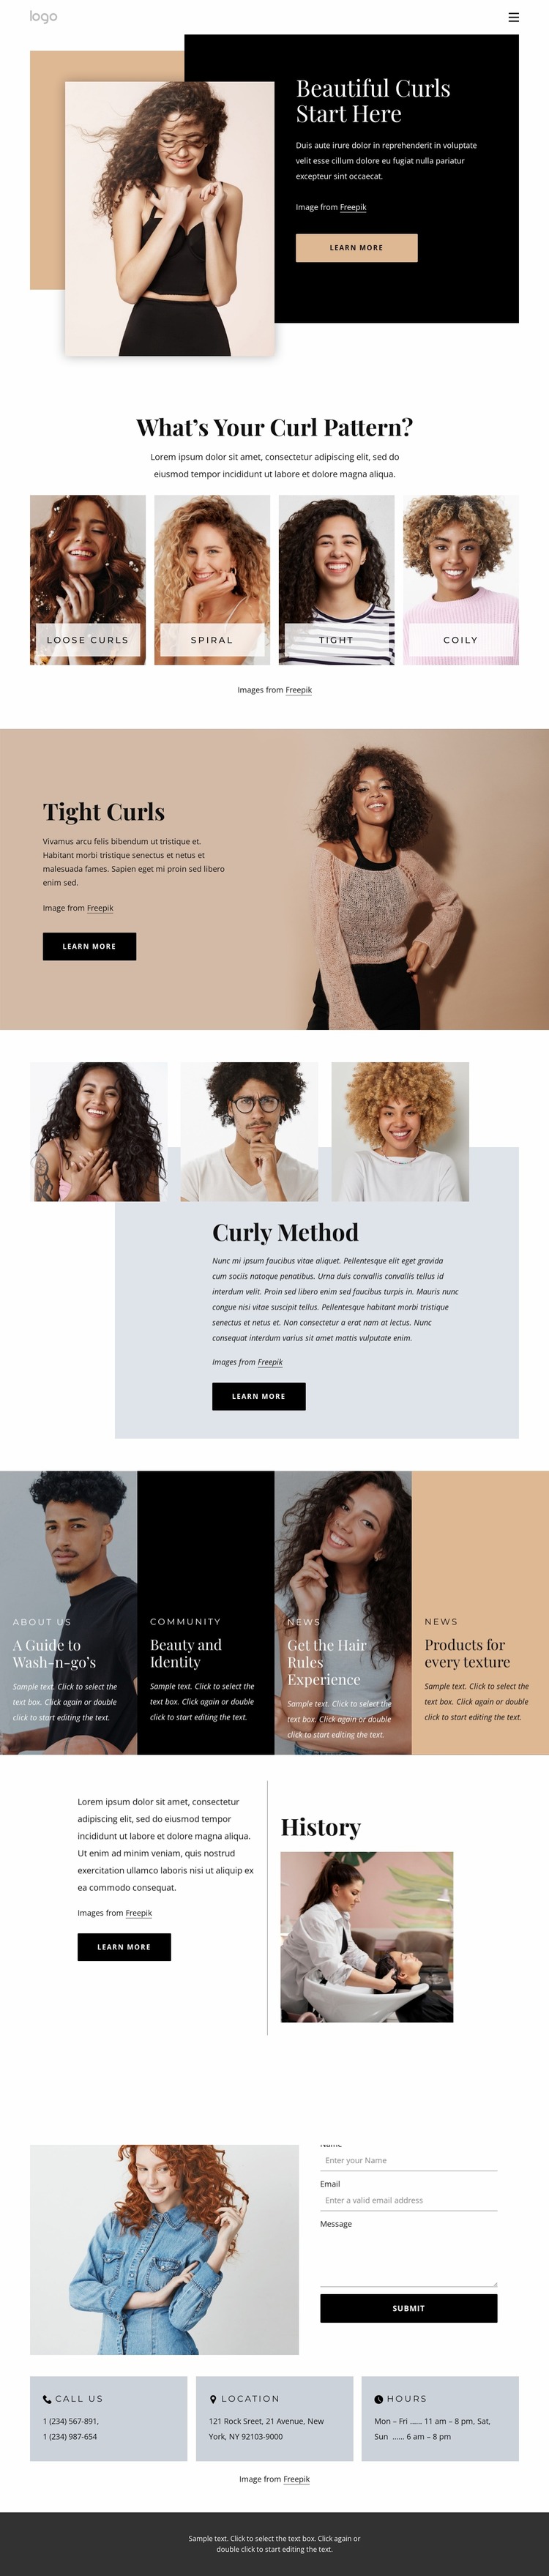 Bring out the best in your curls WordPress Website Builder